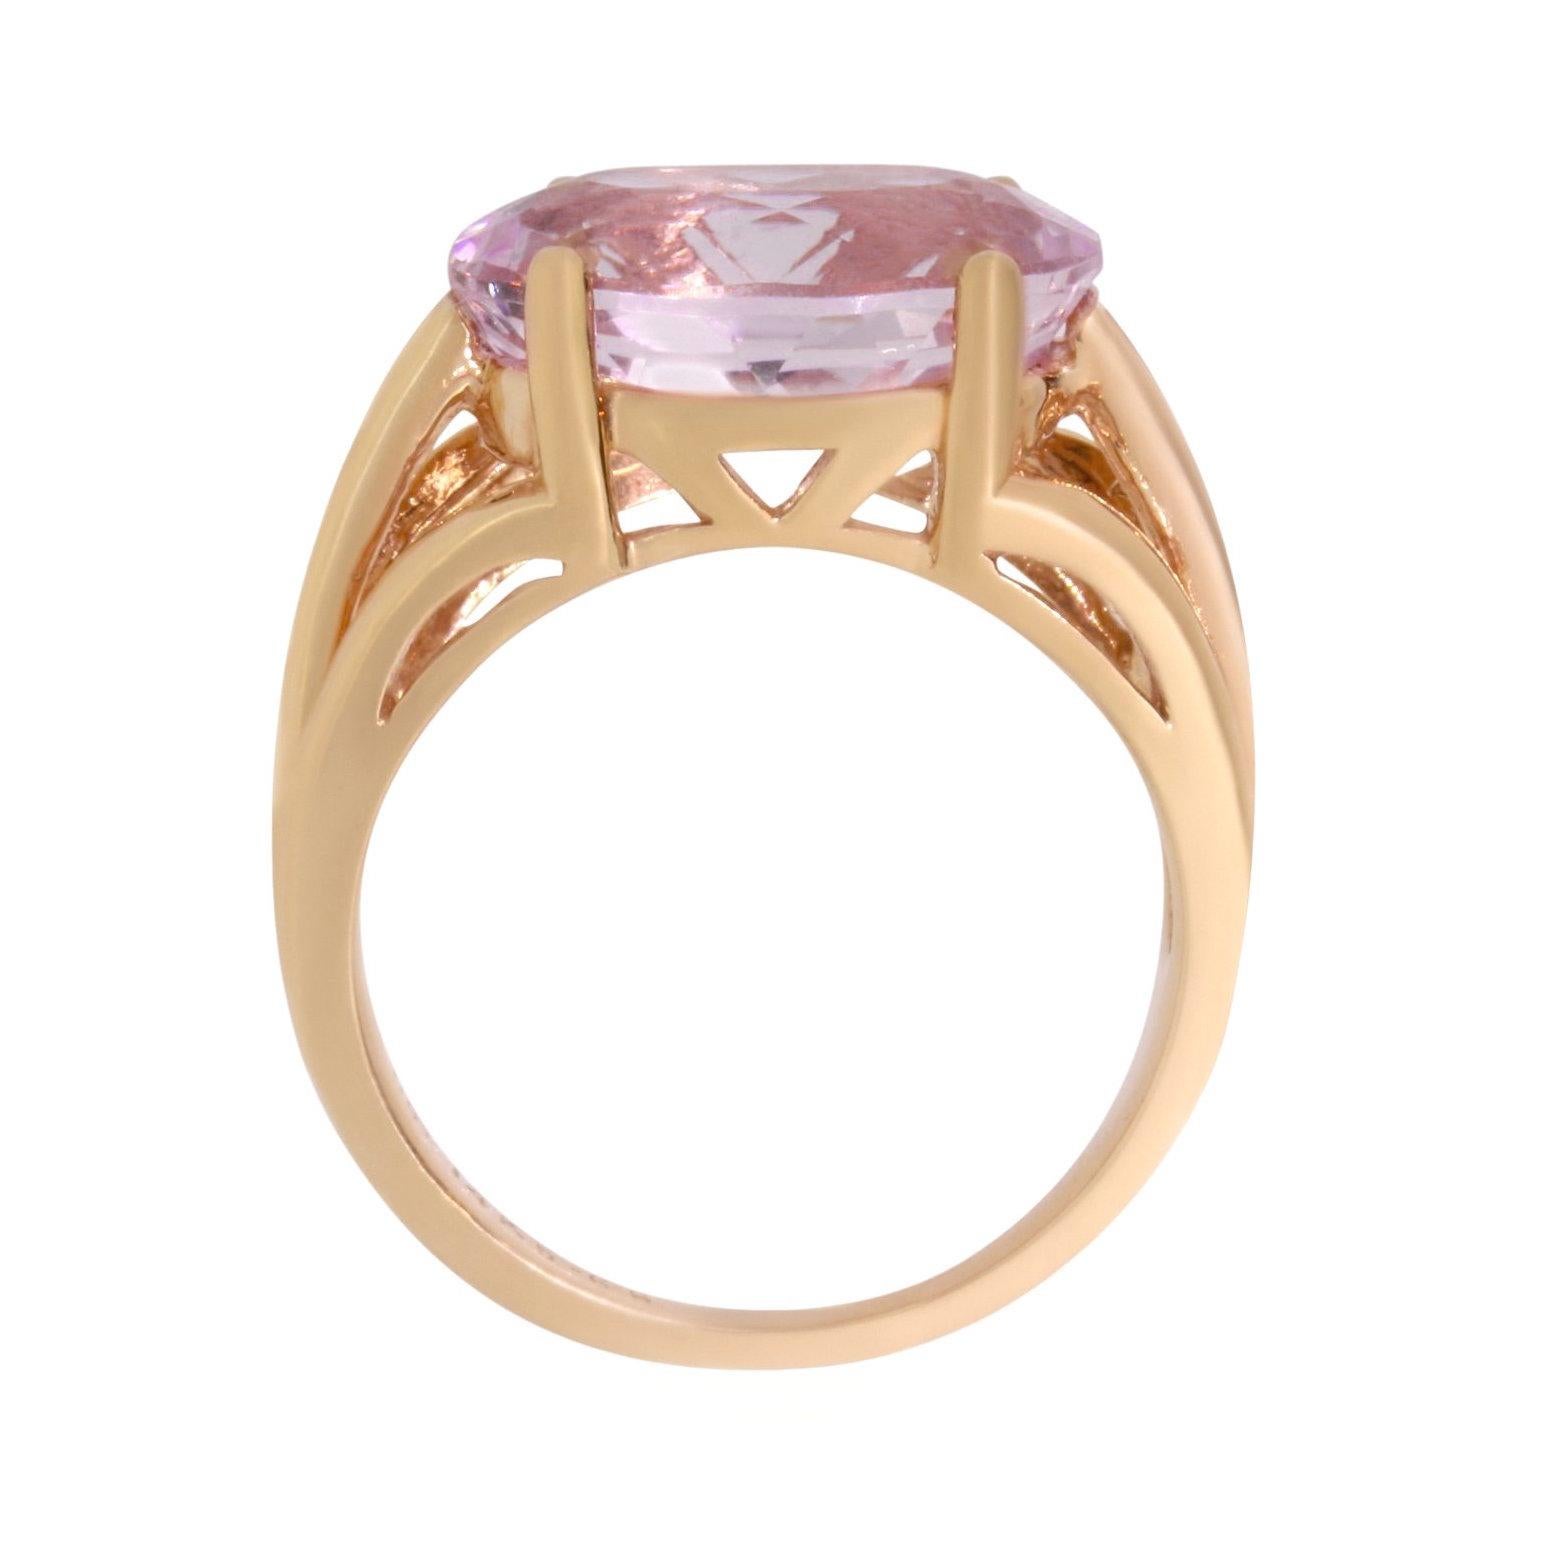 Material: 14k Rose Gold 
Center Stone Details: 5.66 Carat Oval Shaped Pink Morganite - 10 x 14 mm
Mounting Diamond Details: 8 Brilliant Round White Diamond Approximately 0.09 Carats - Clarity: SI / Color: H-I
Ring Size: Size 6.5. Alberto offers